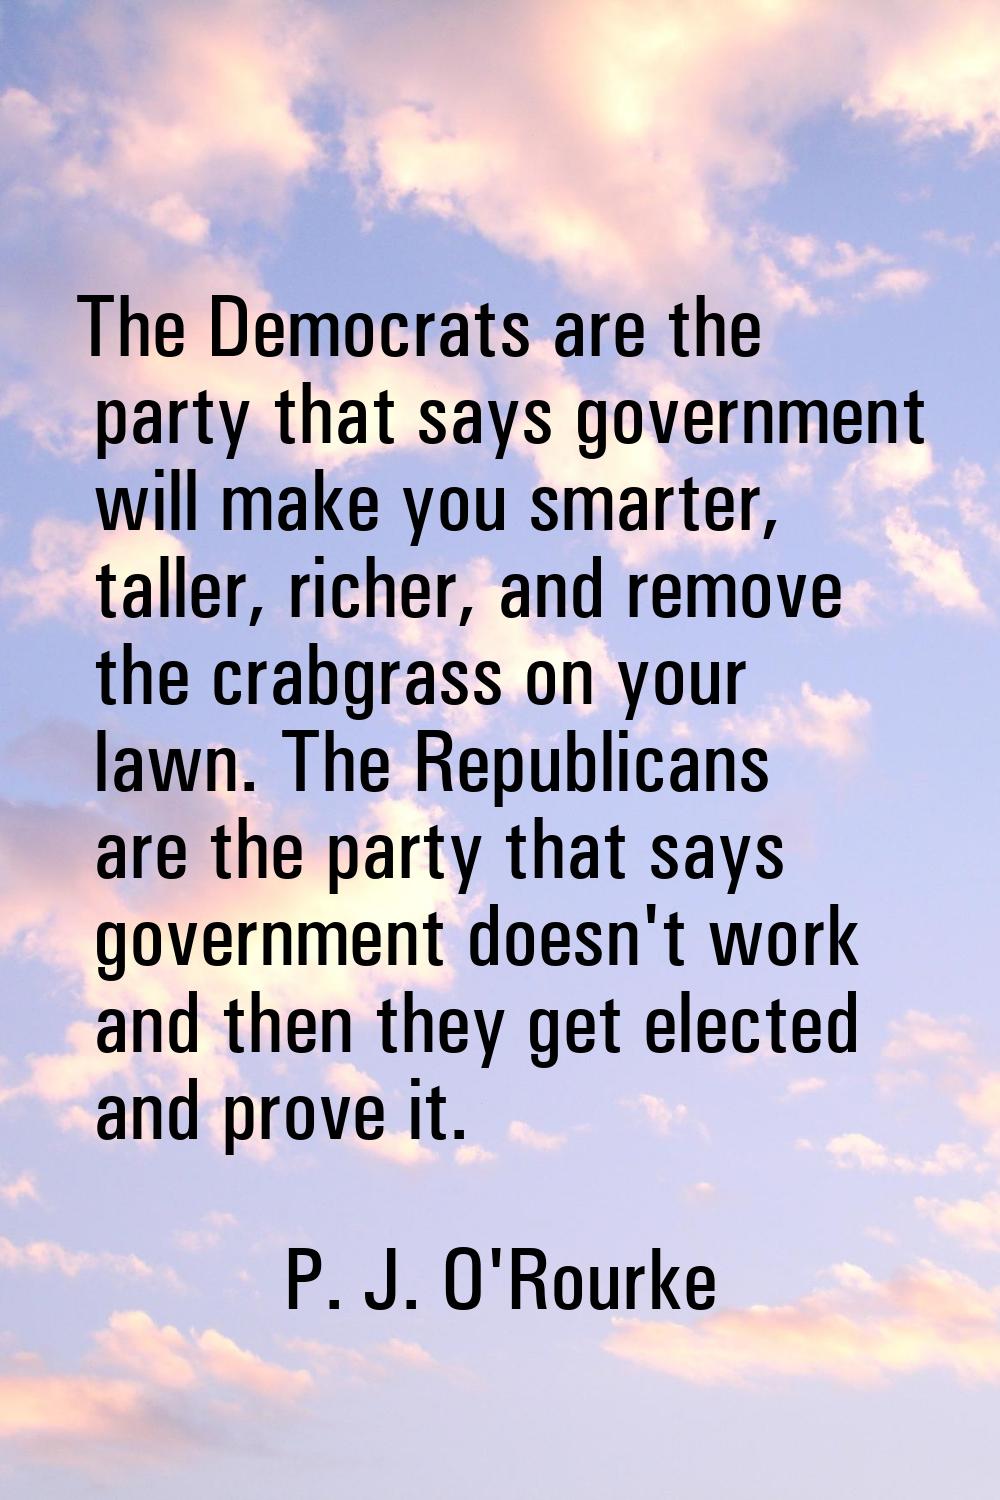 The Democrats are the party that says government will make you smarter, taller, richer, and remove 